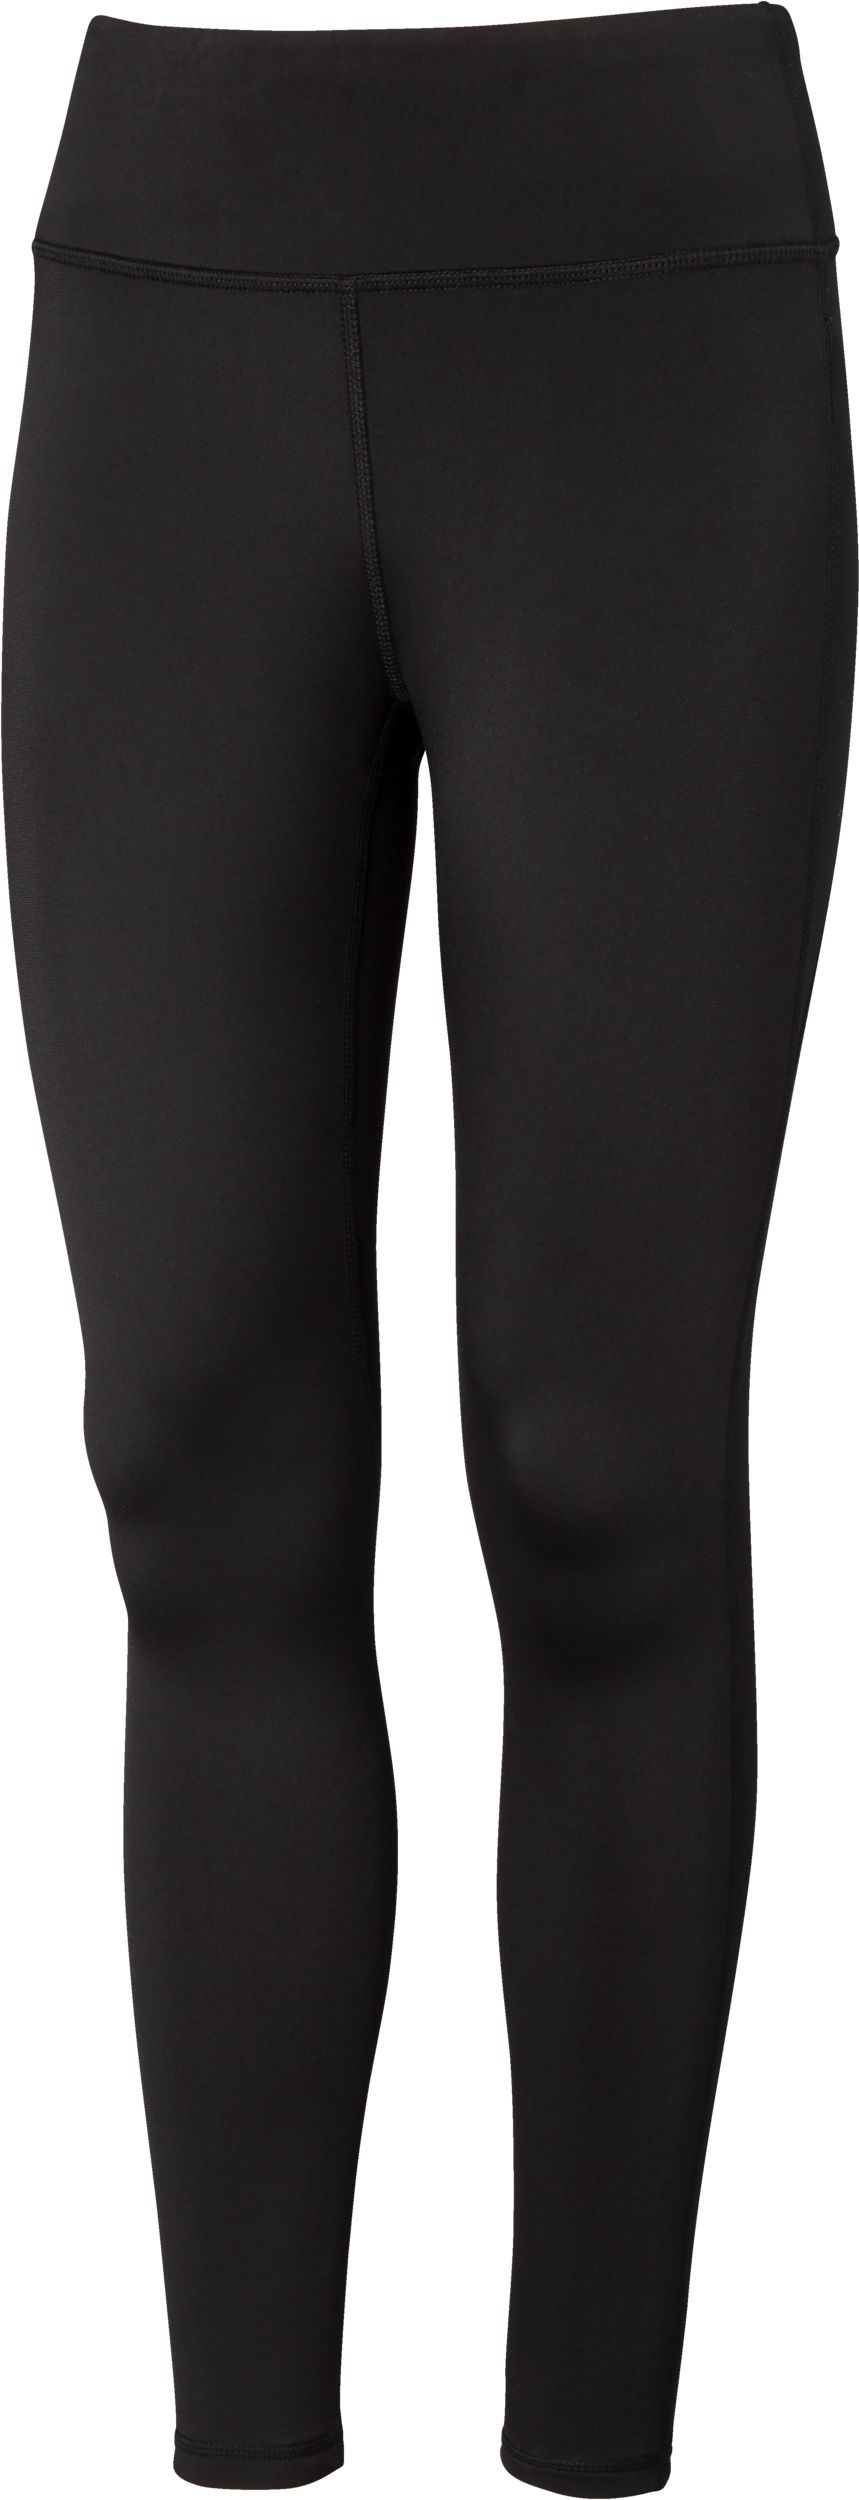 https://media-www.sportchek.ca/product/div-03-softgoods/dpt-72-casual-clothing/sdpt-02-womens/333801741/hh-w-verglas-warm-legging-922-black-15824054-c84a-4378-a09d-e47218c8c8fa-jpgrendition.jpg?imdensity=1&imwidth=1244&impolicy=mZoom